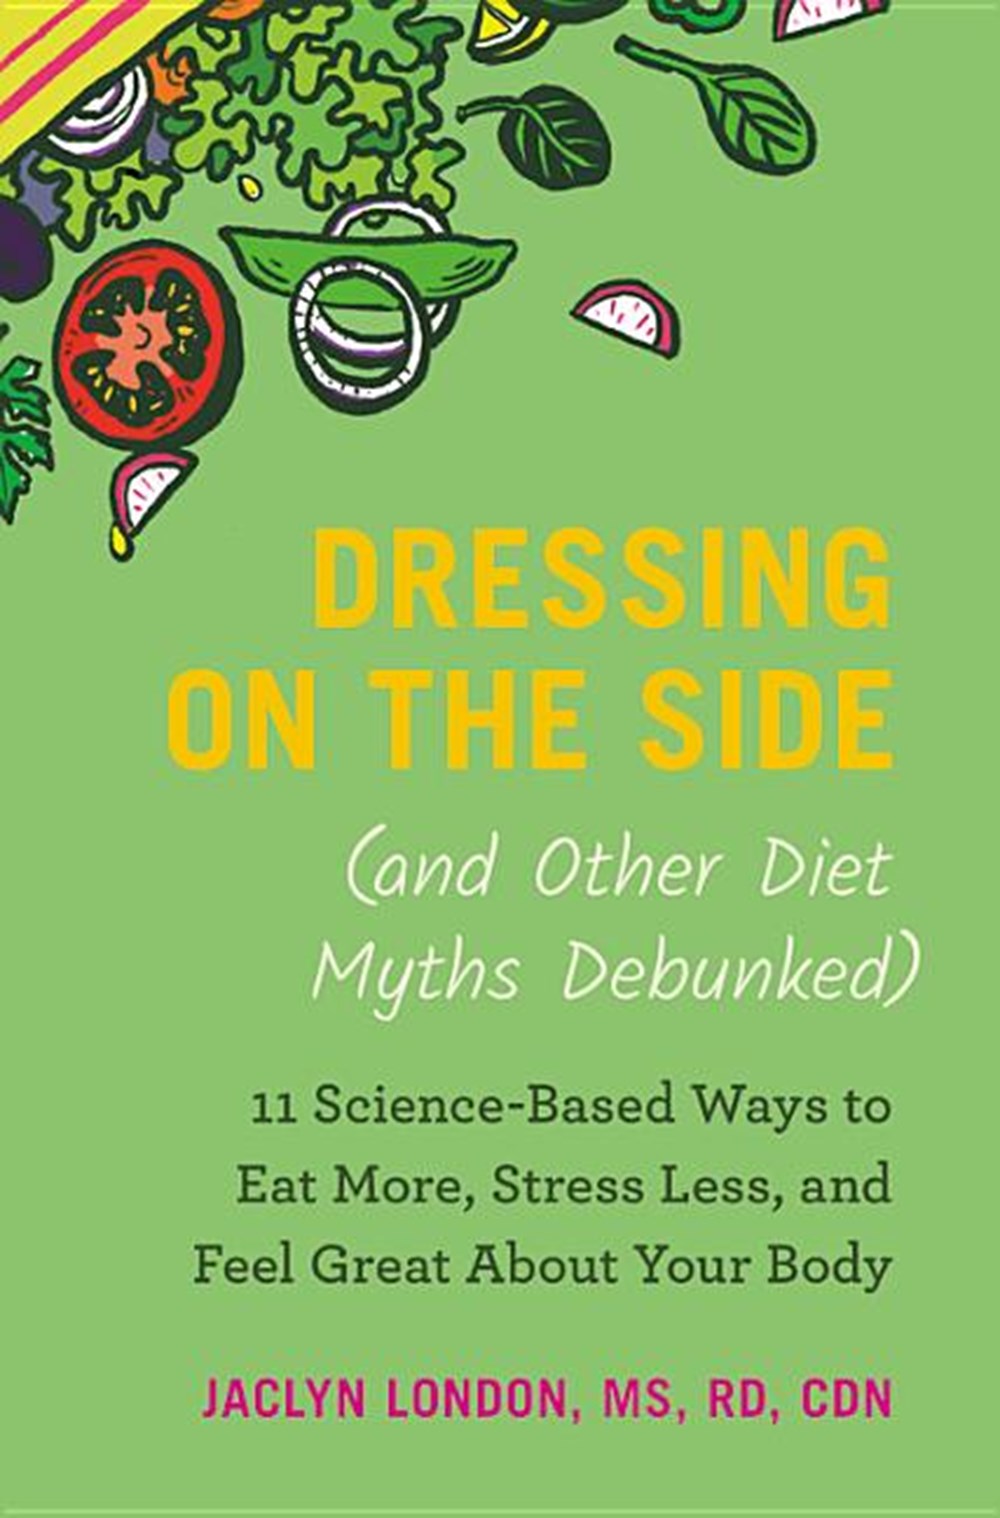 Dressing on the Side (and Other Diet Myths Debunked): 11 Science-Based Ways to Eat More, Stress Less